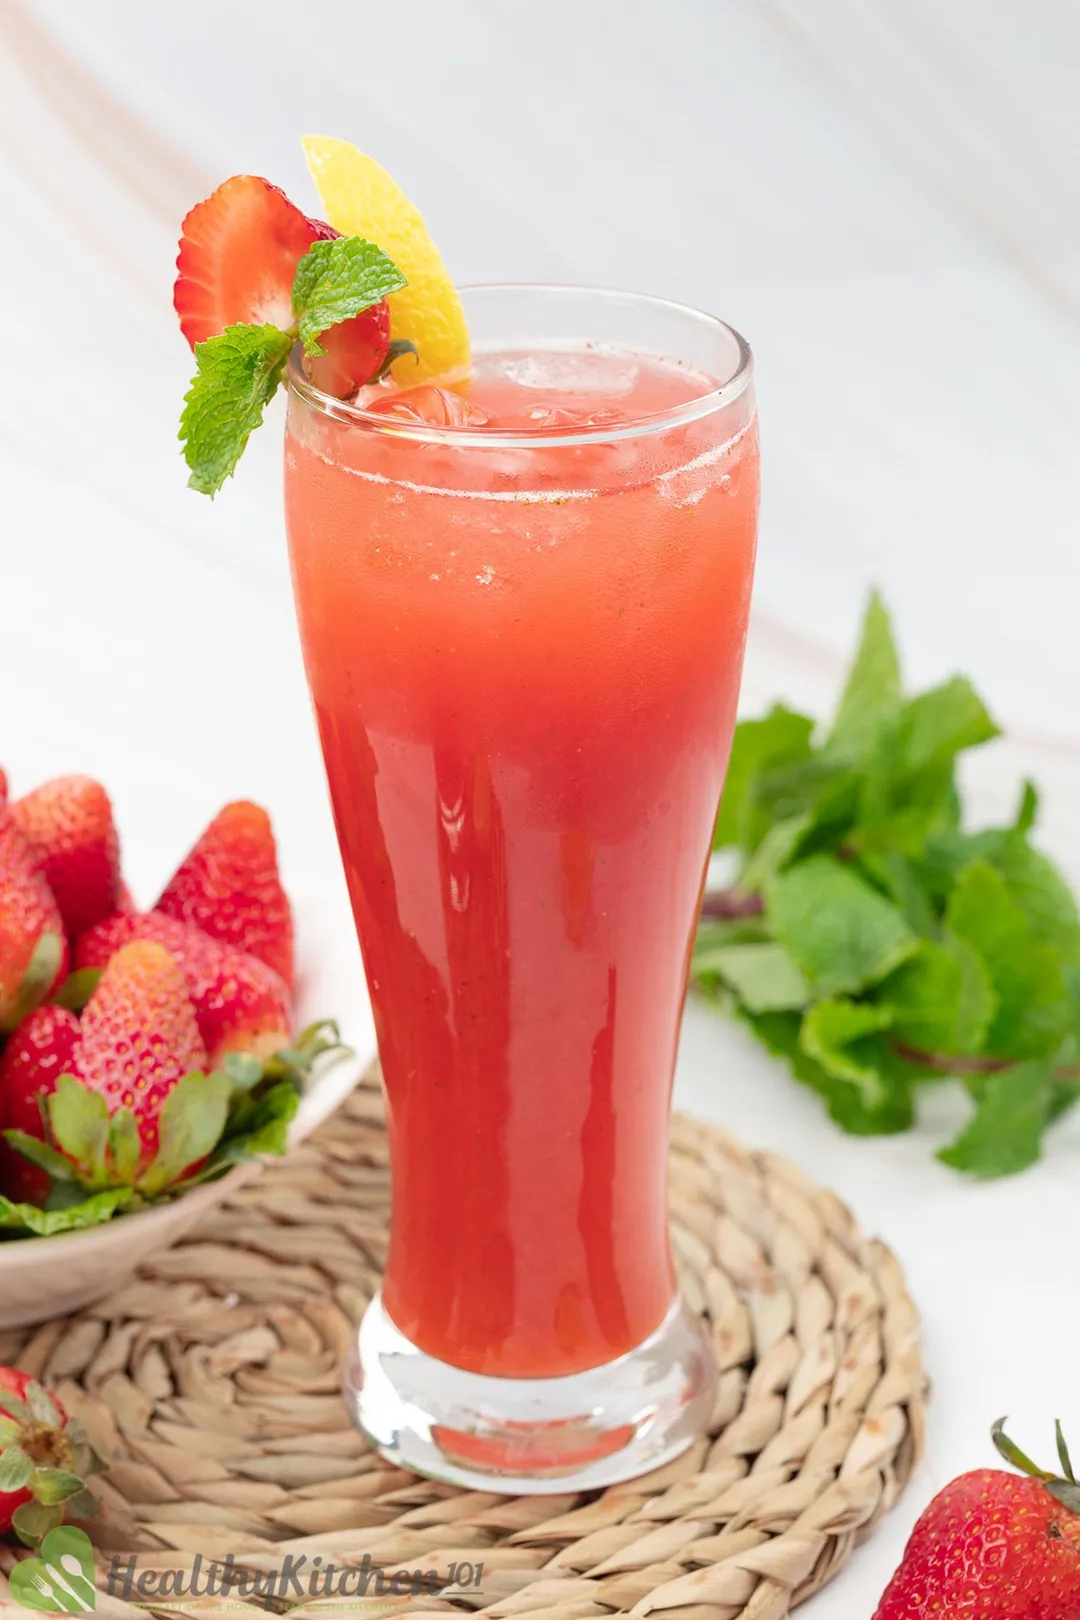 a glass of Strawberry Juice surrounded by a plate of strawberry mint leaves